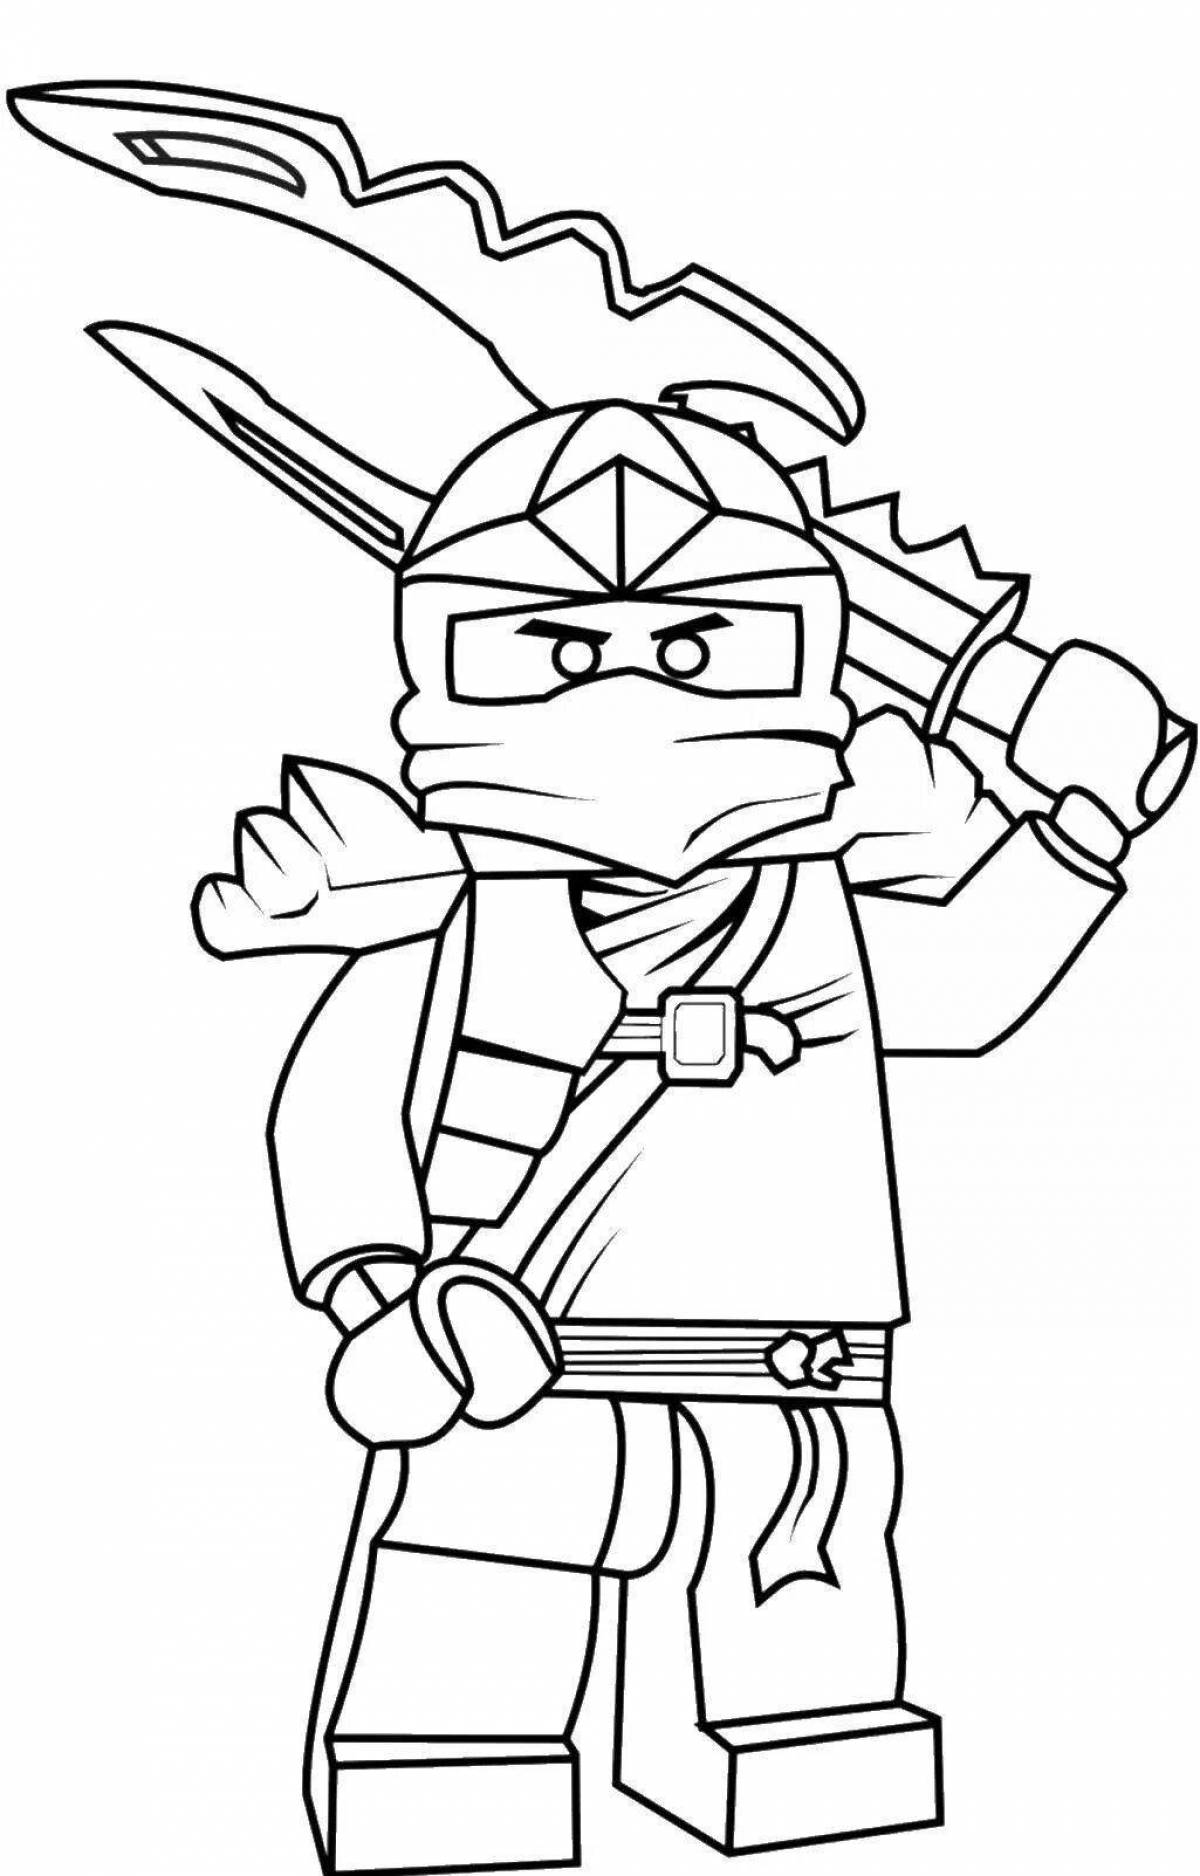 Amazing lego ninja turtles coloring pages